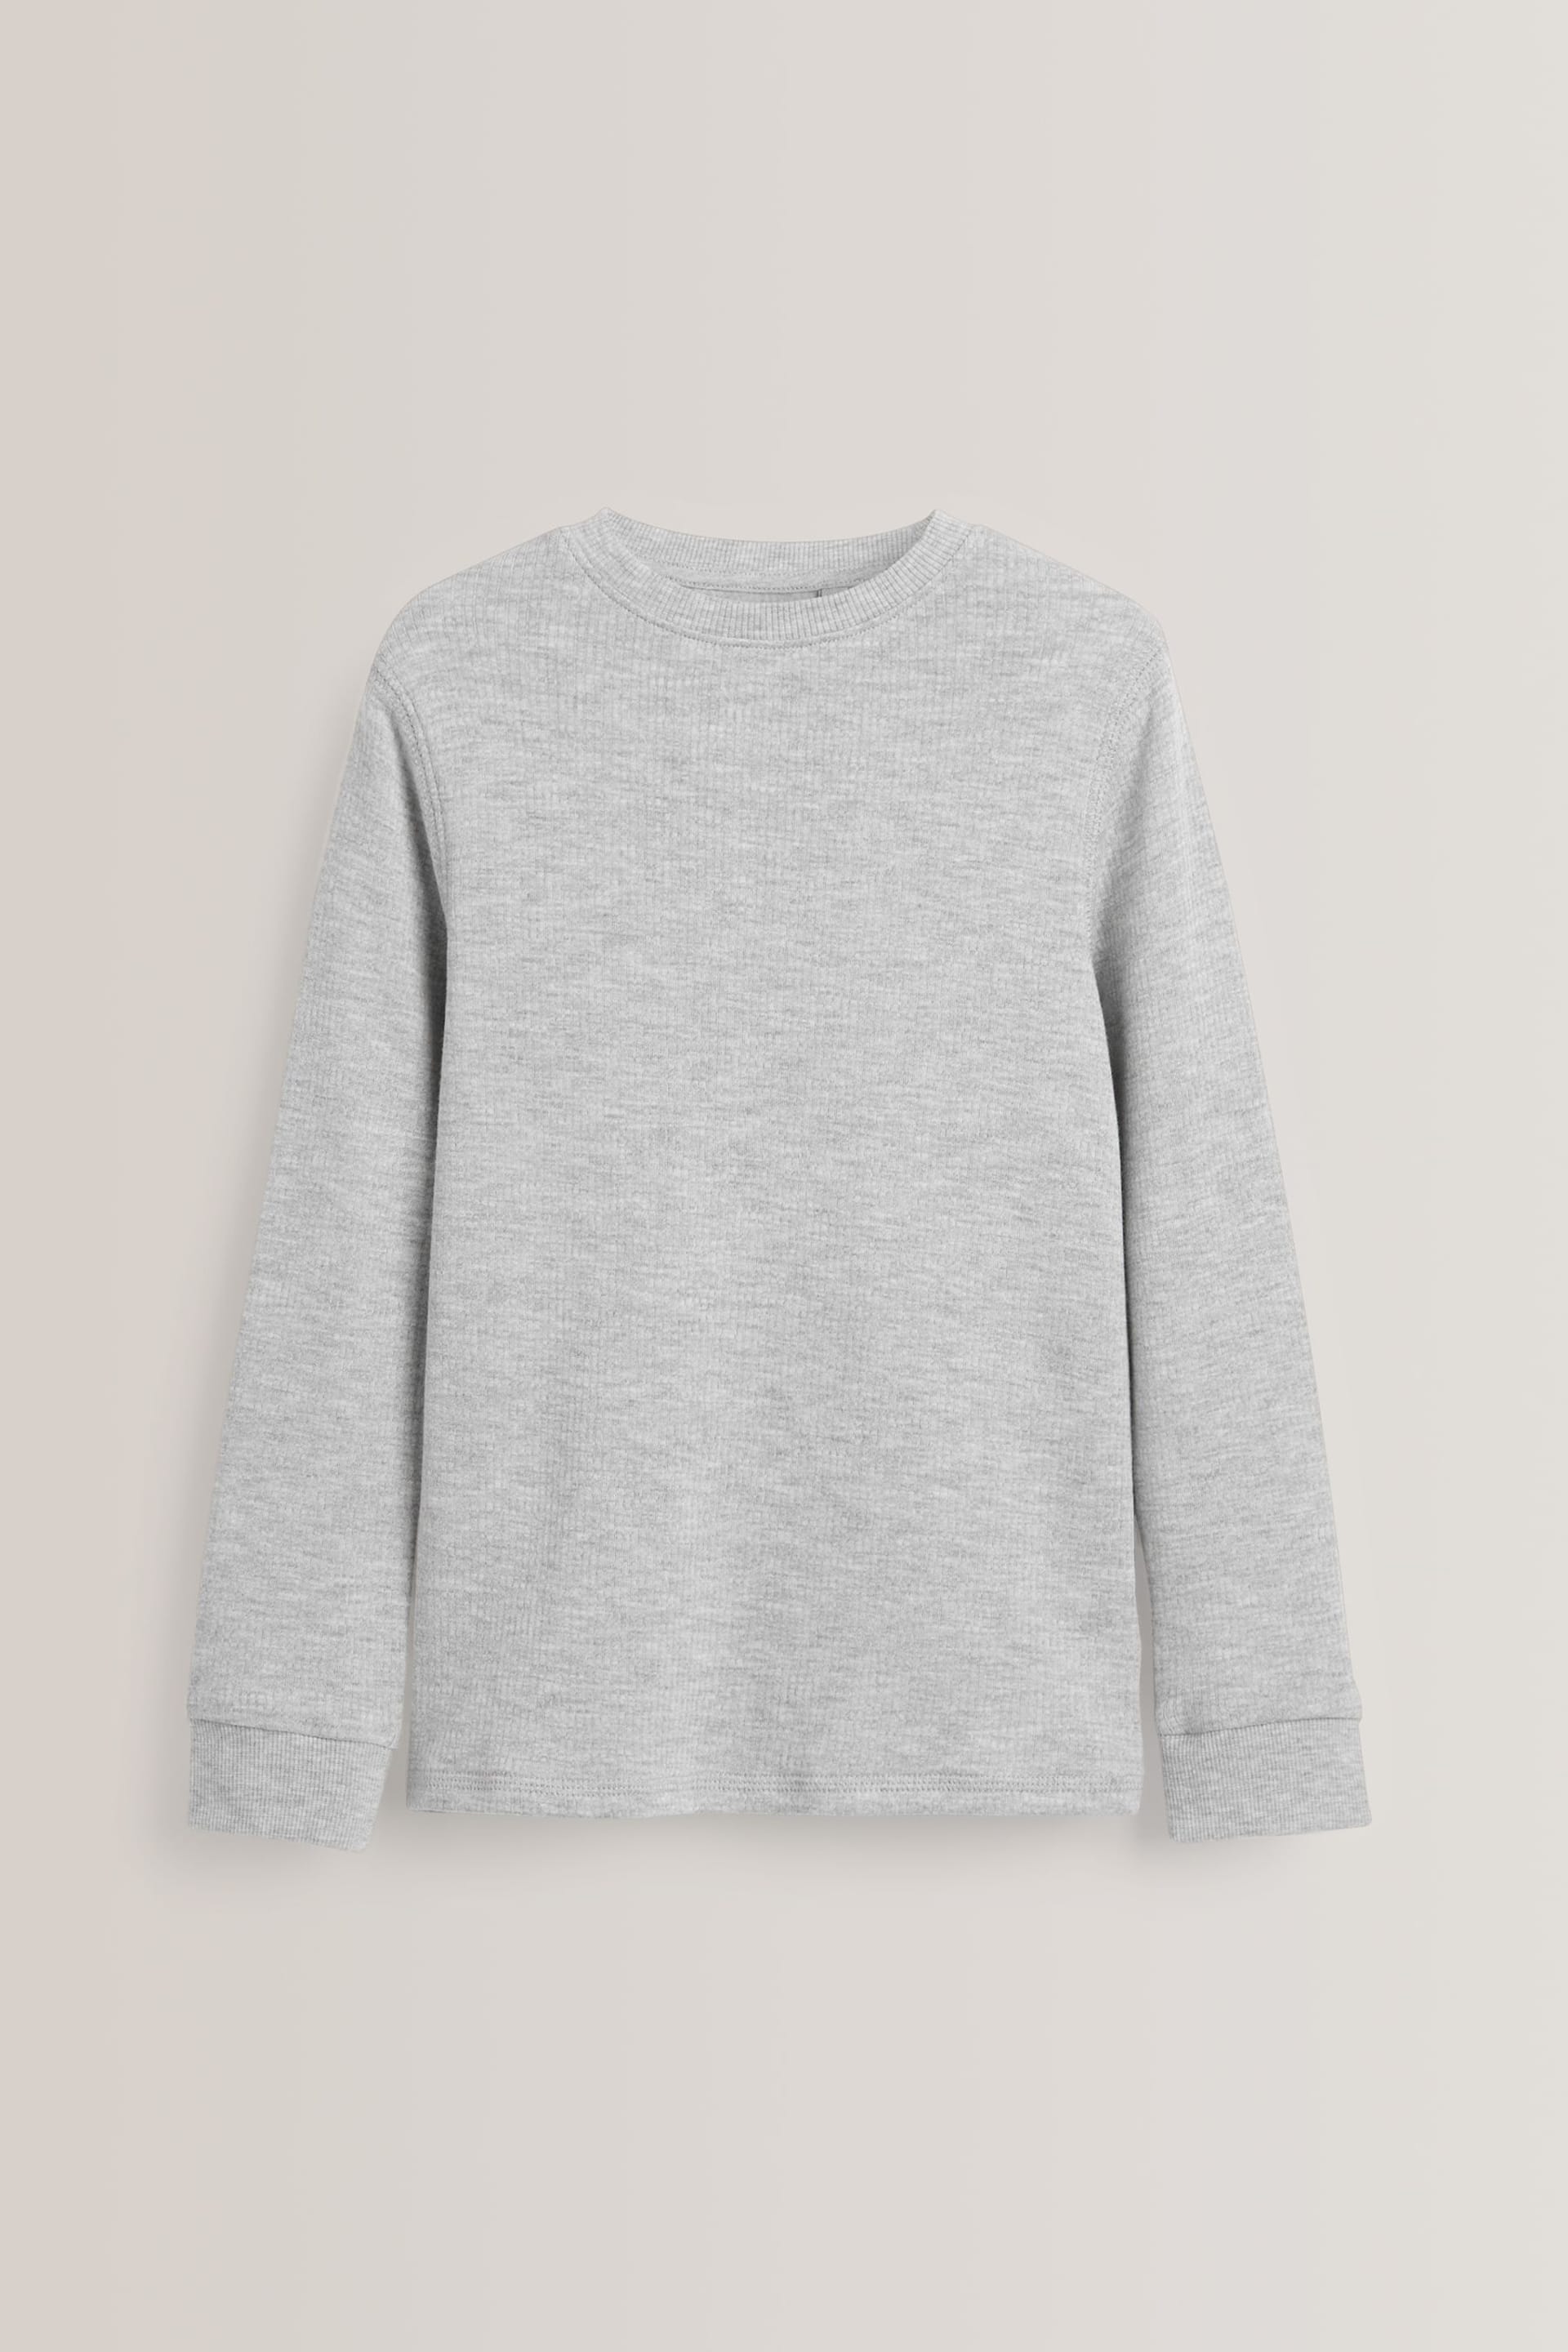 Grey/White Long Sleeve Thermal Tops 2 Pack (2-16yrs) - Image 2 of 5